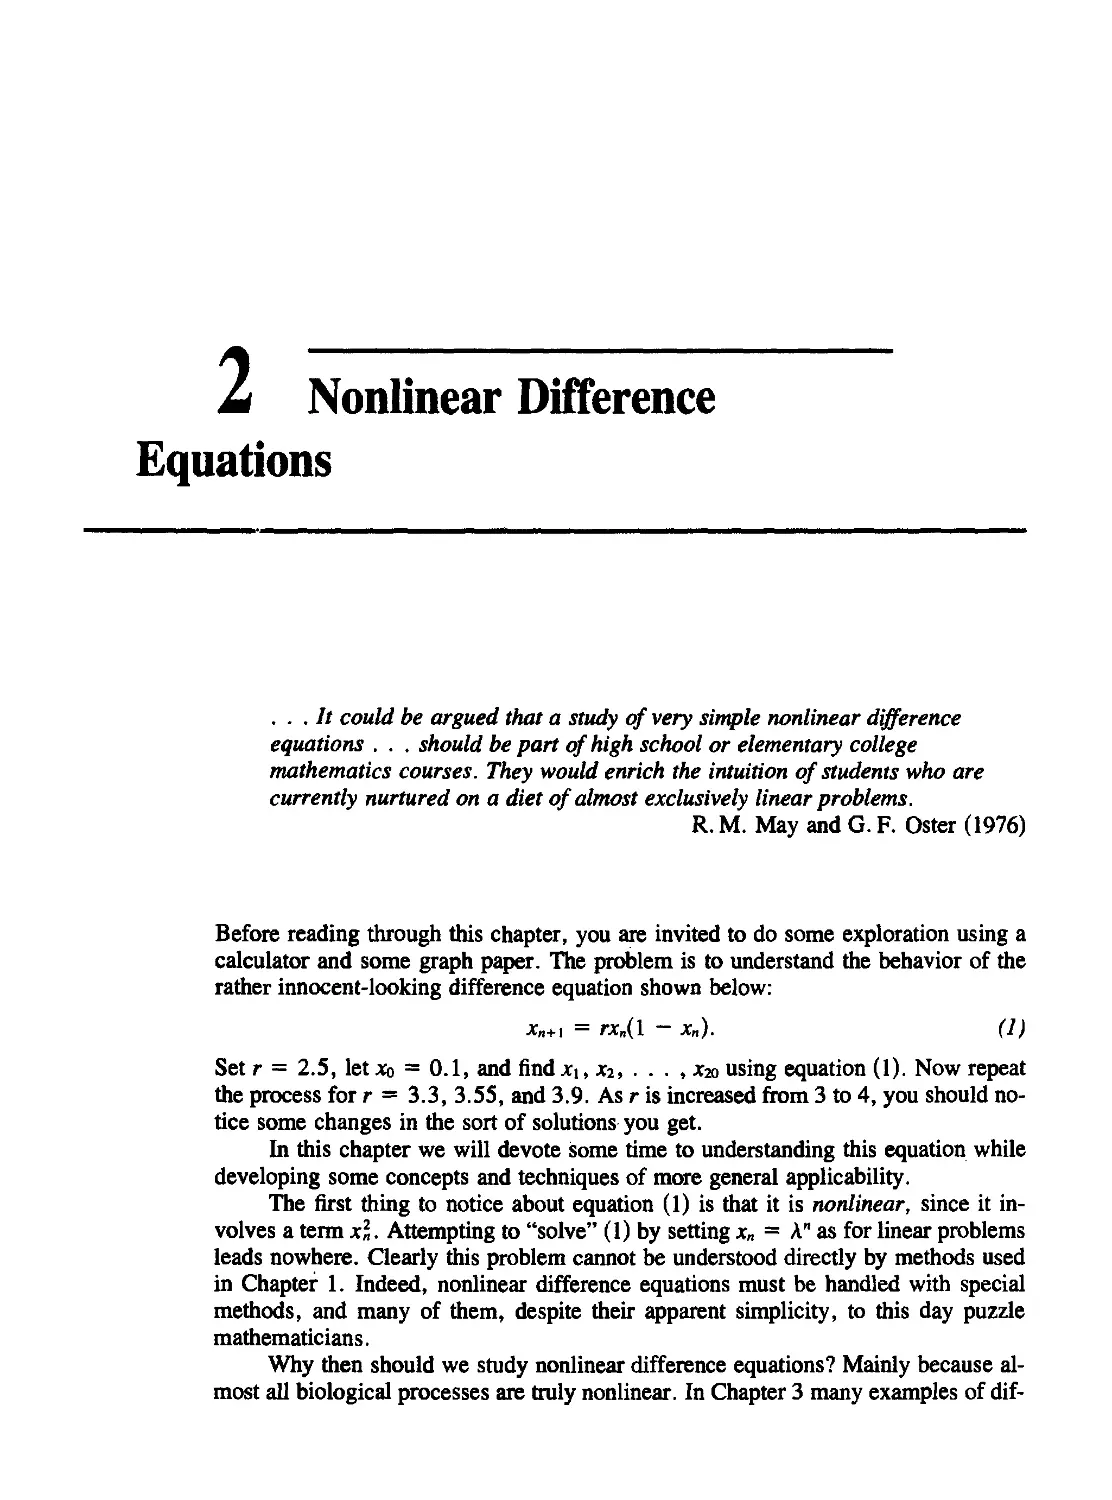 Chapter 2 Nonlinear Difference Equations